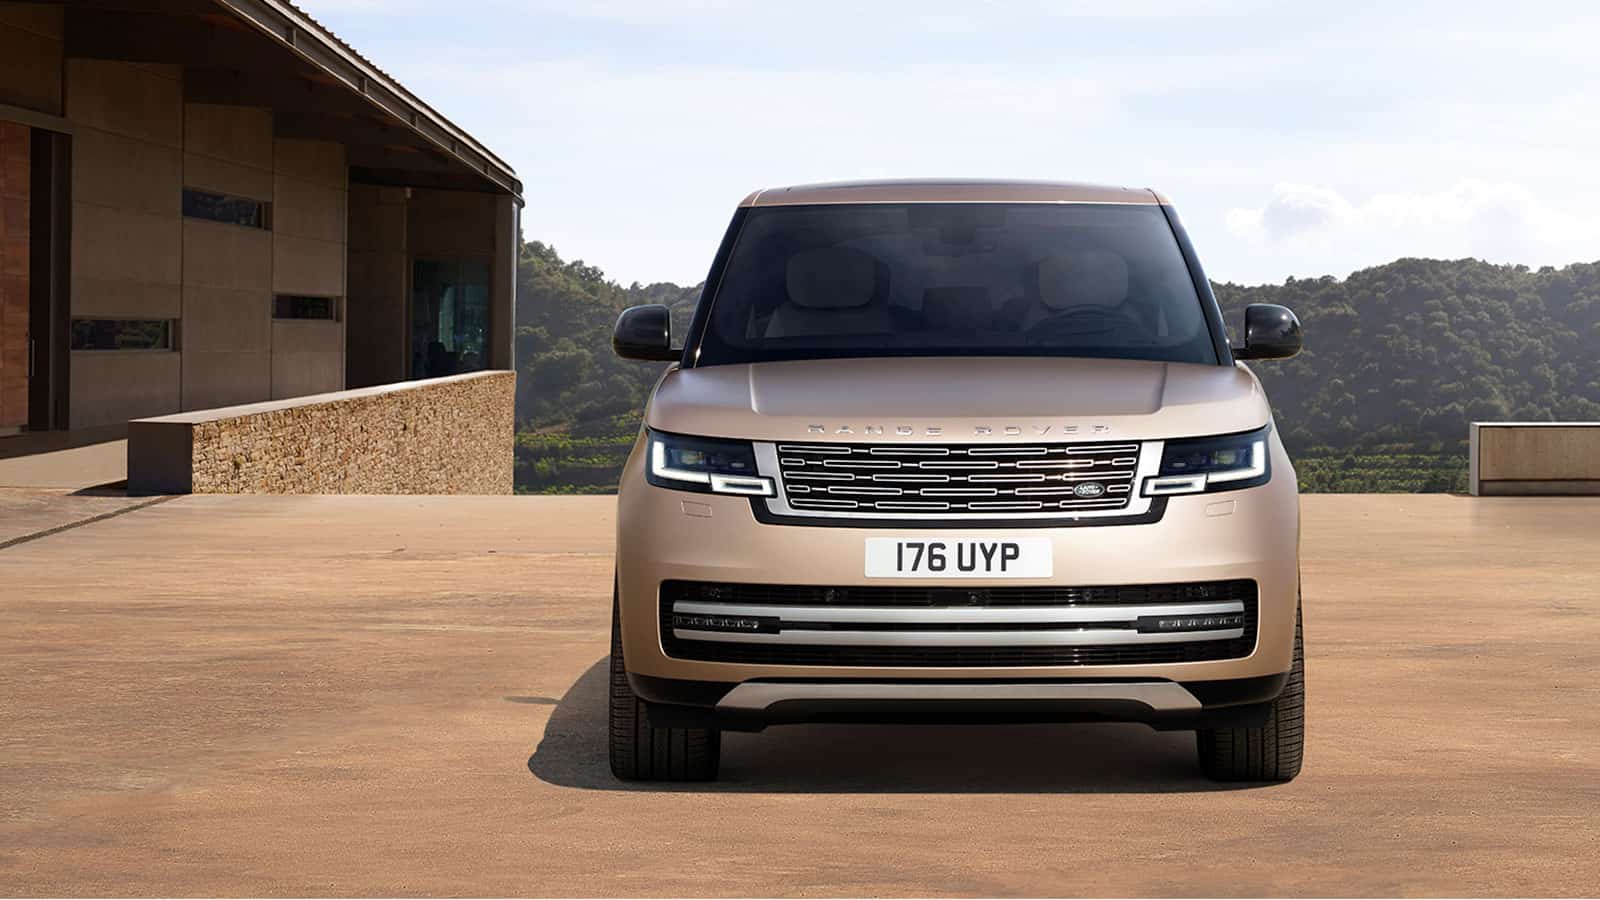 Exterior Front View of the New Range Rover